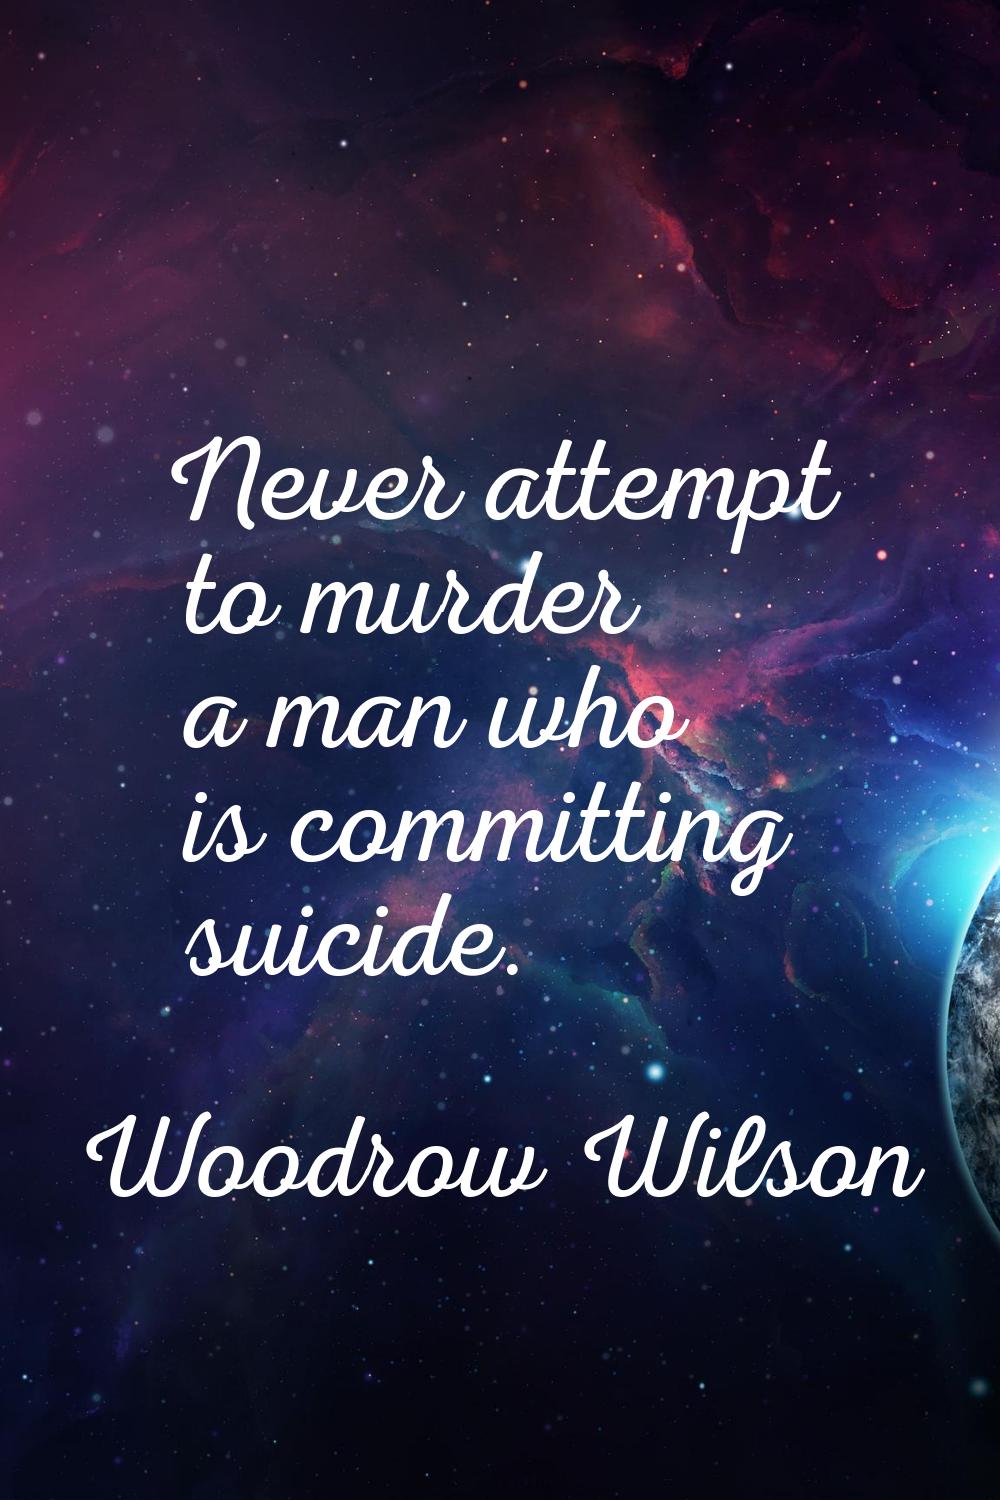 Never attempt to murder a man who is committing suicide.